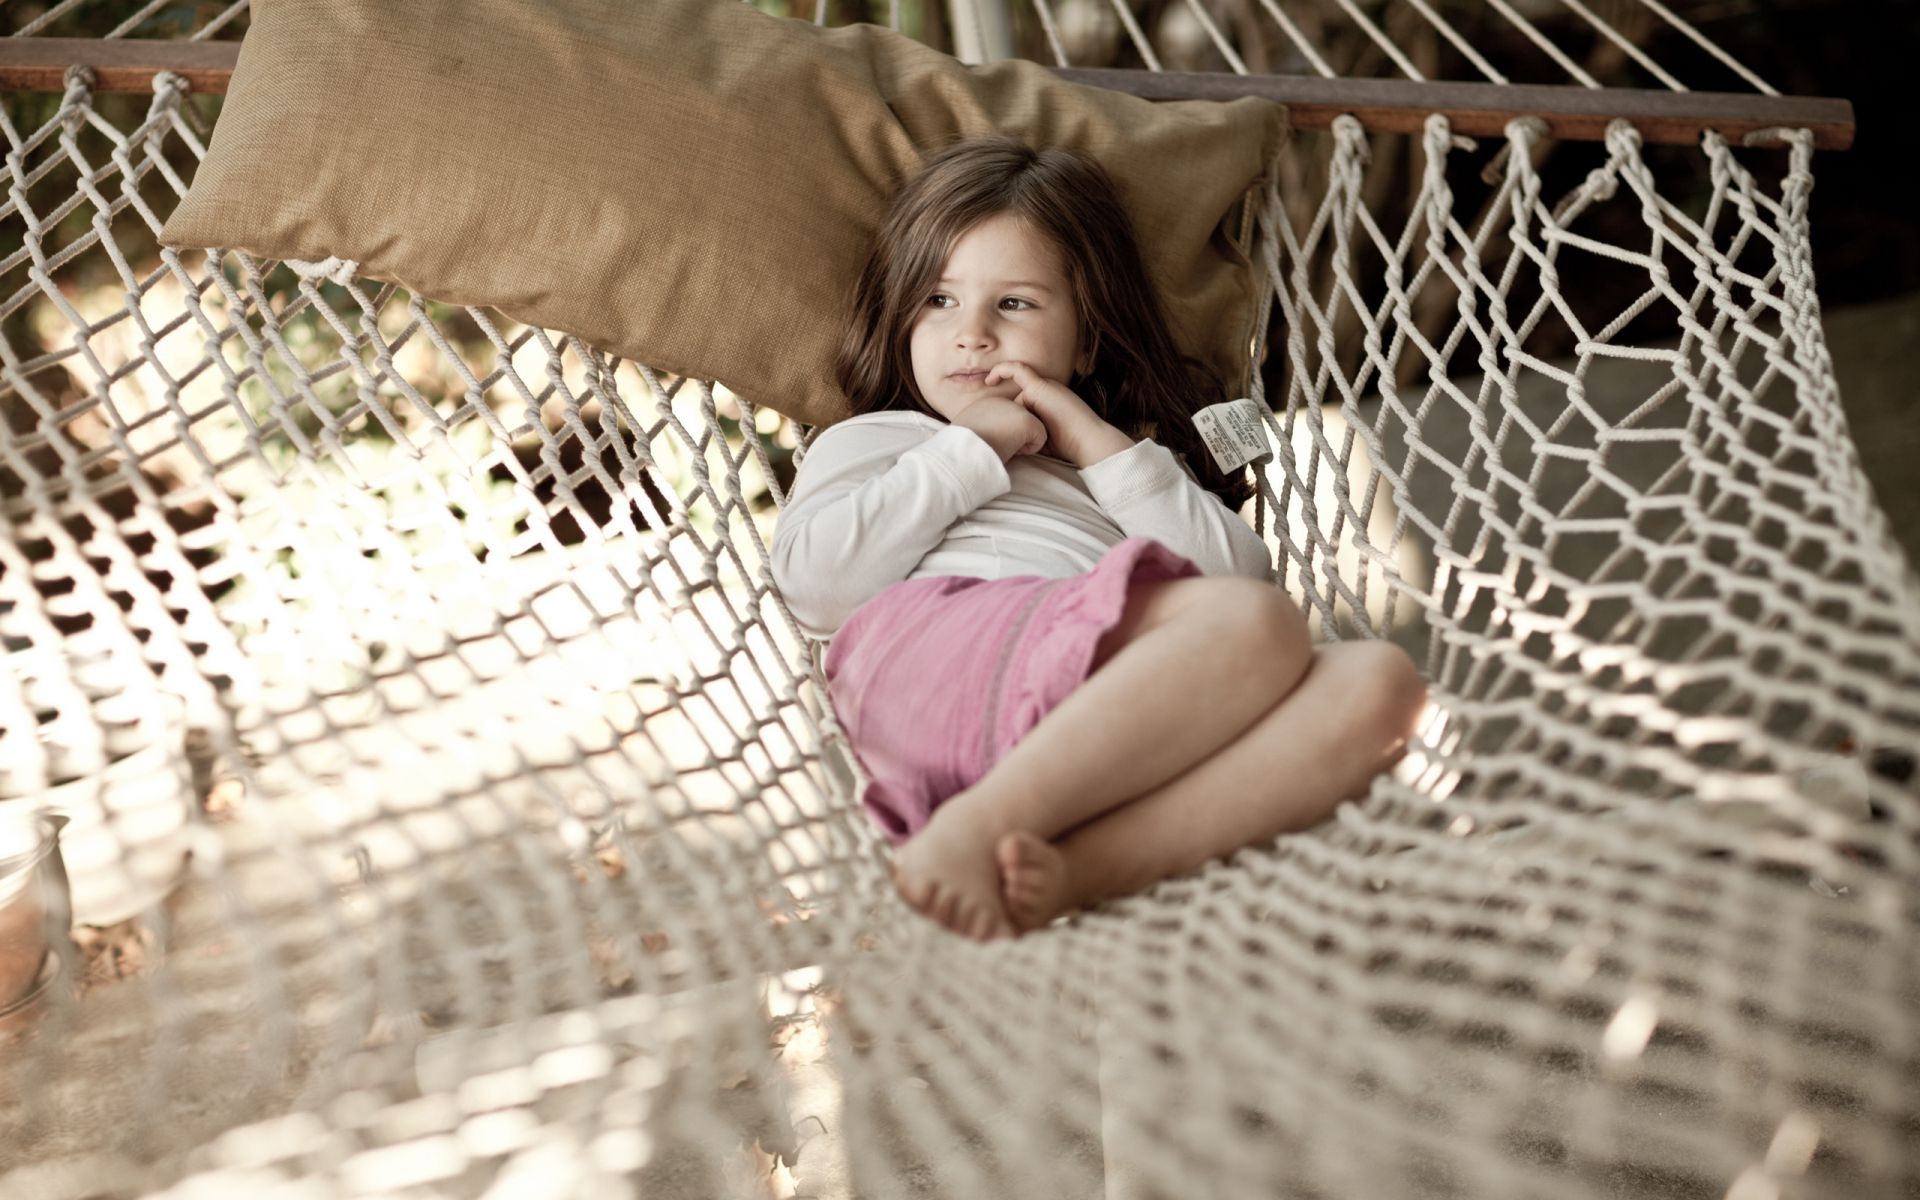 children basket hammock girl leisure child woman one relaxation portrait family web lifestyle indoors adult fun beautiful bed cute wicker